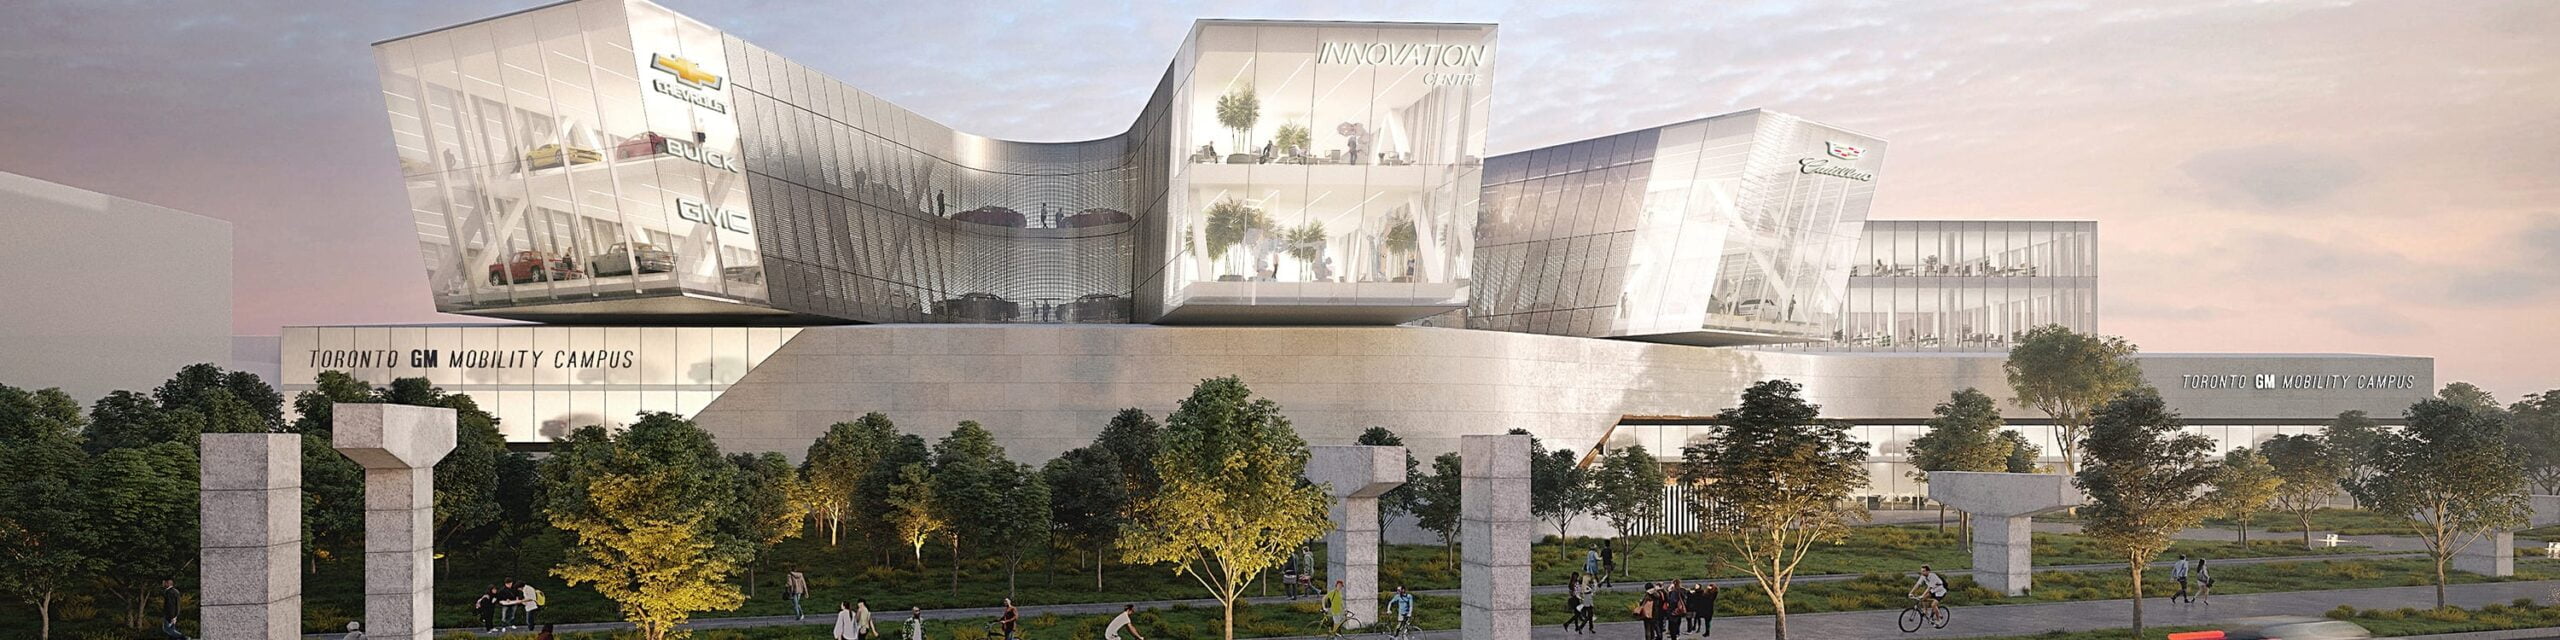 Toronto GM Mobility Campus outdoor rendering